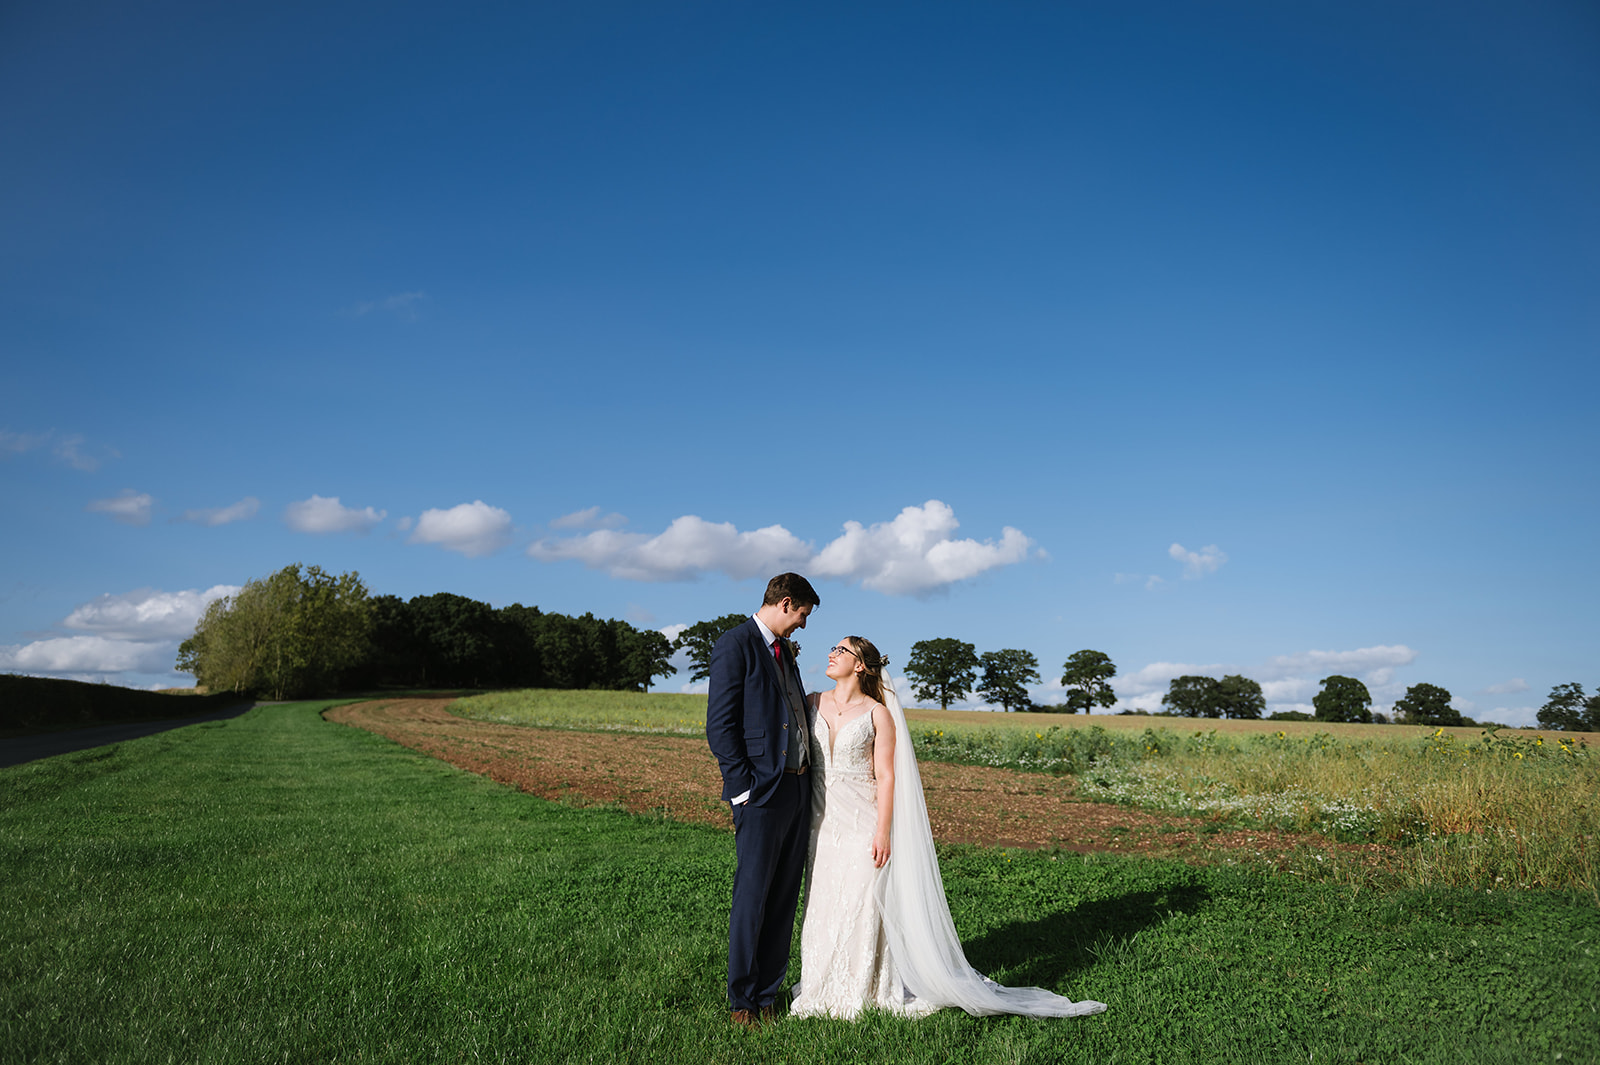 Katie and Steve's glorious sunny wedding at Swallows Nest Barn in Warwick